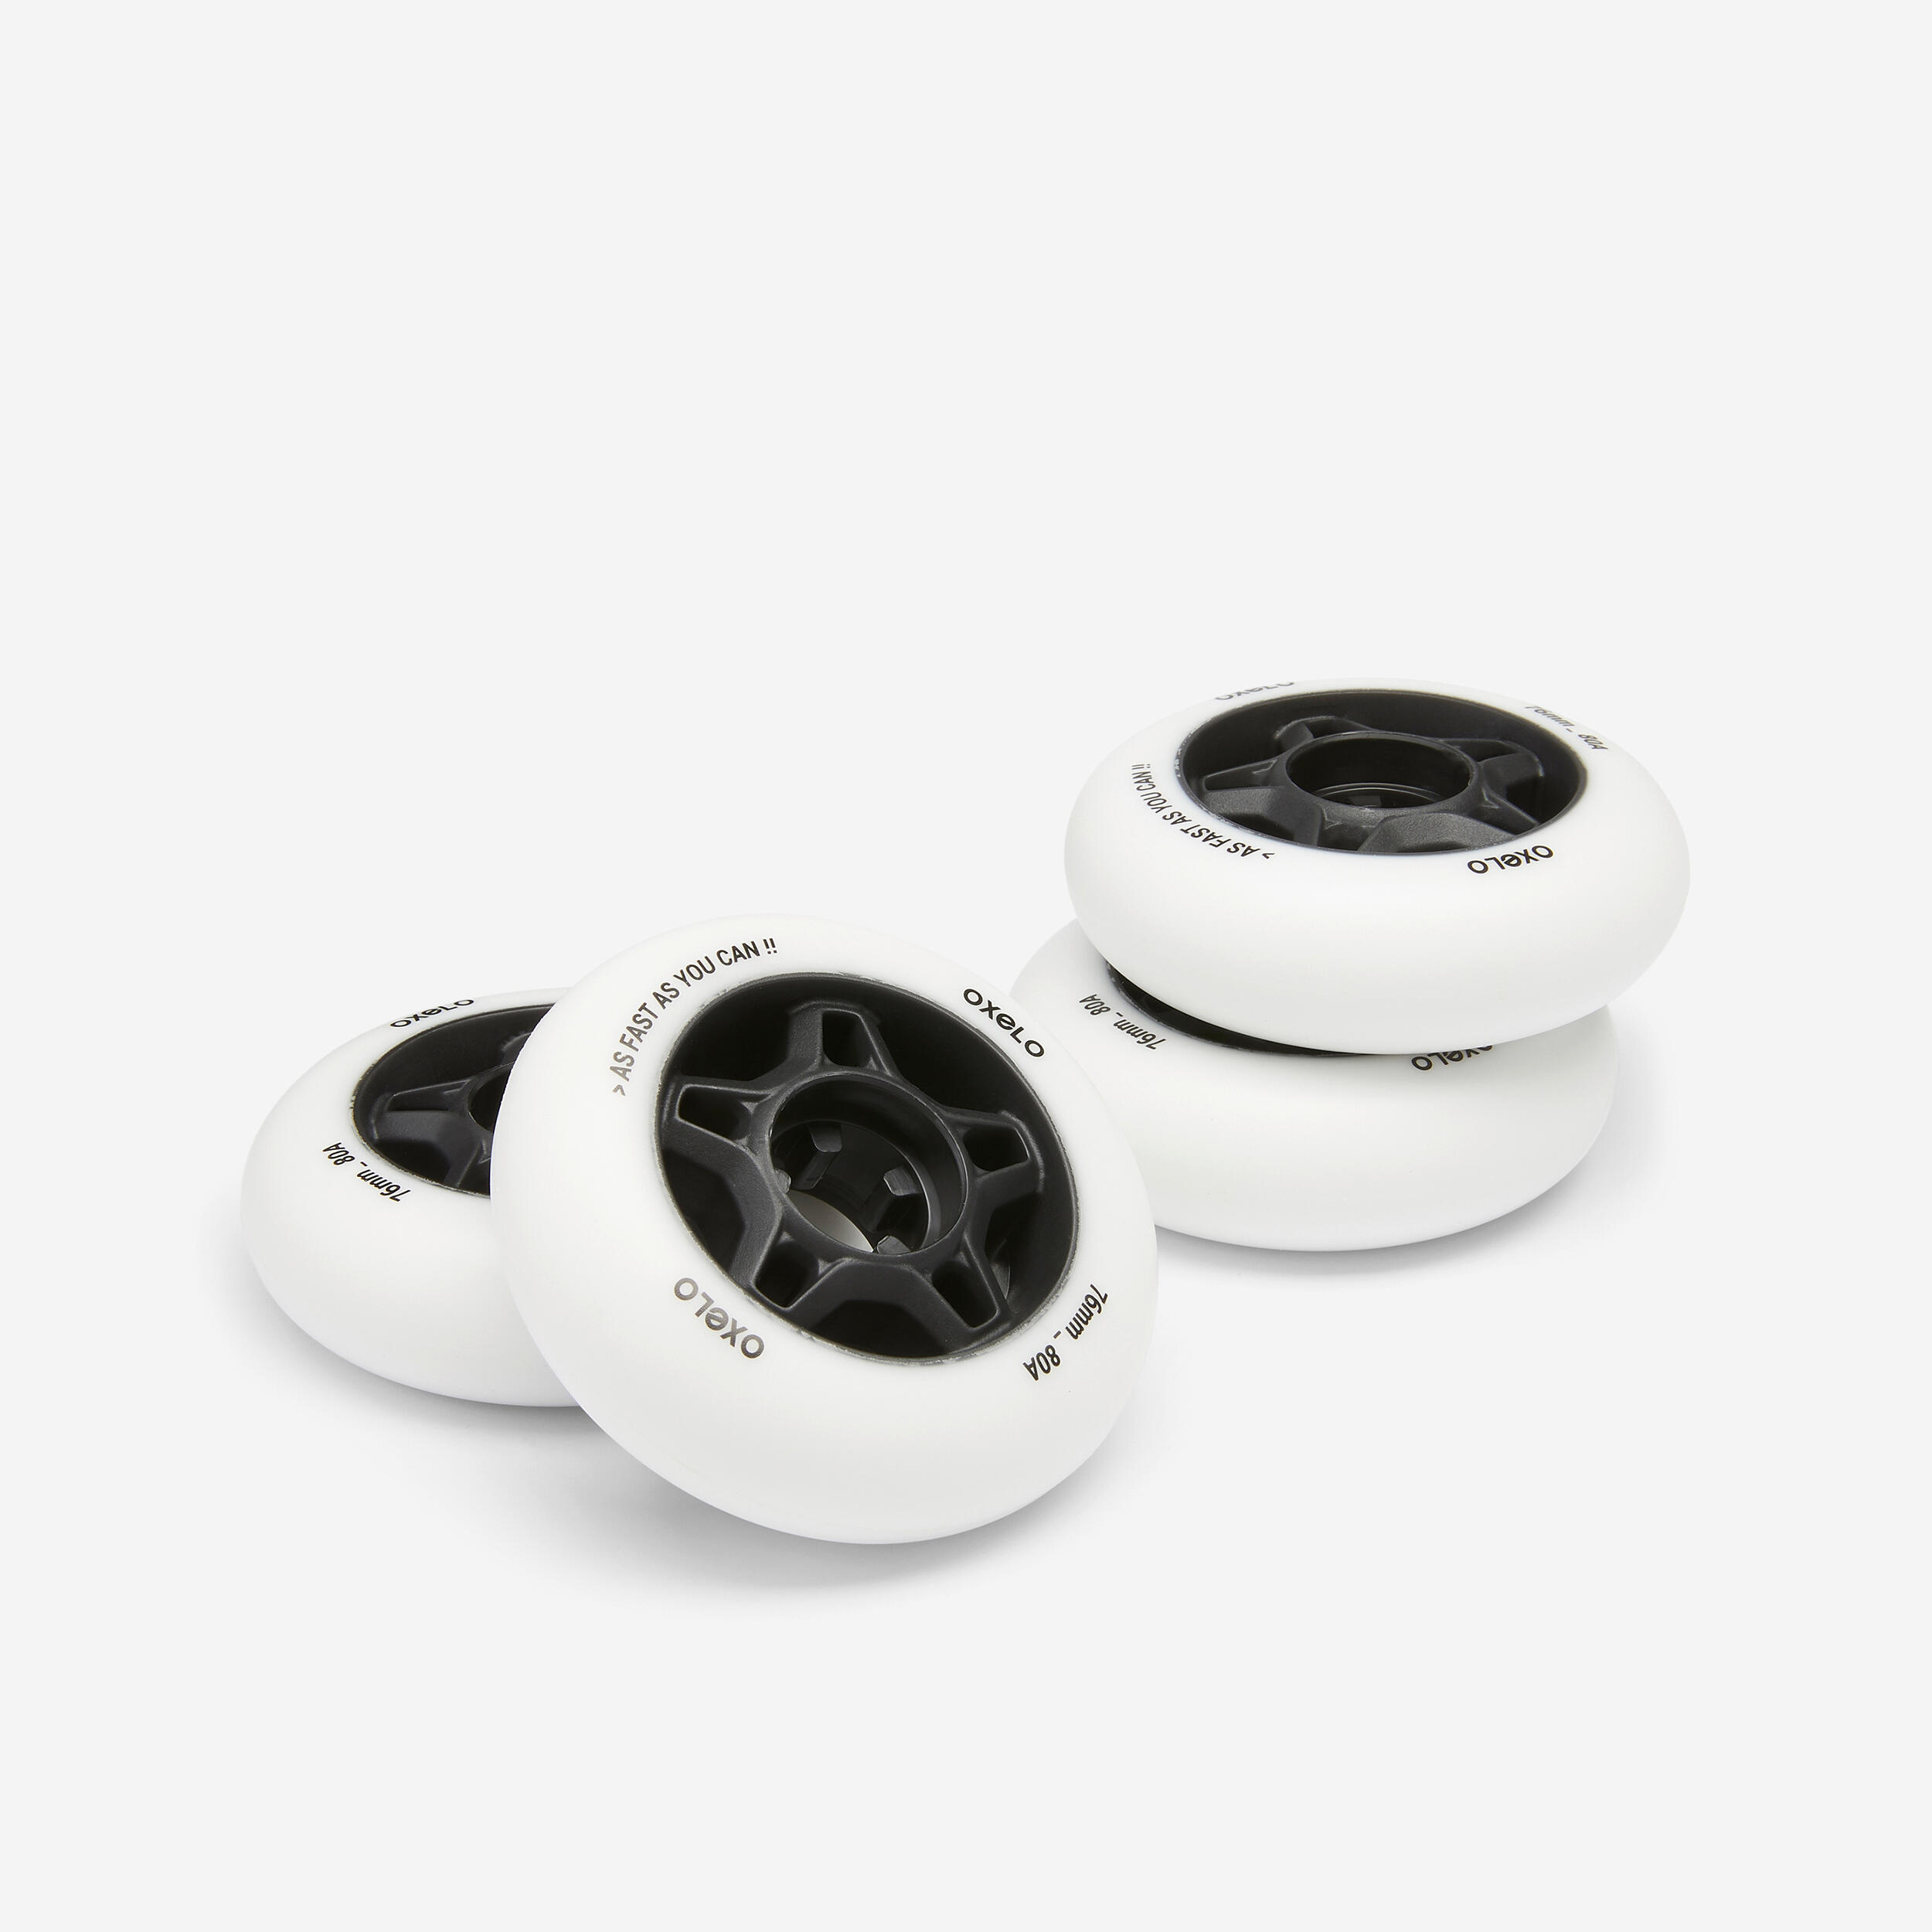 76mm 80A Adult Fitness Inline Skating Wheels 4-Pack Fit - White 1/6